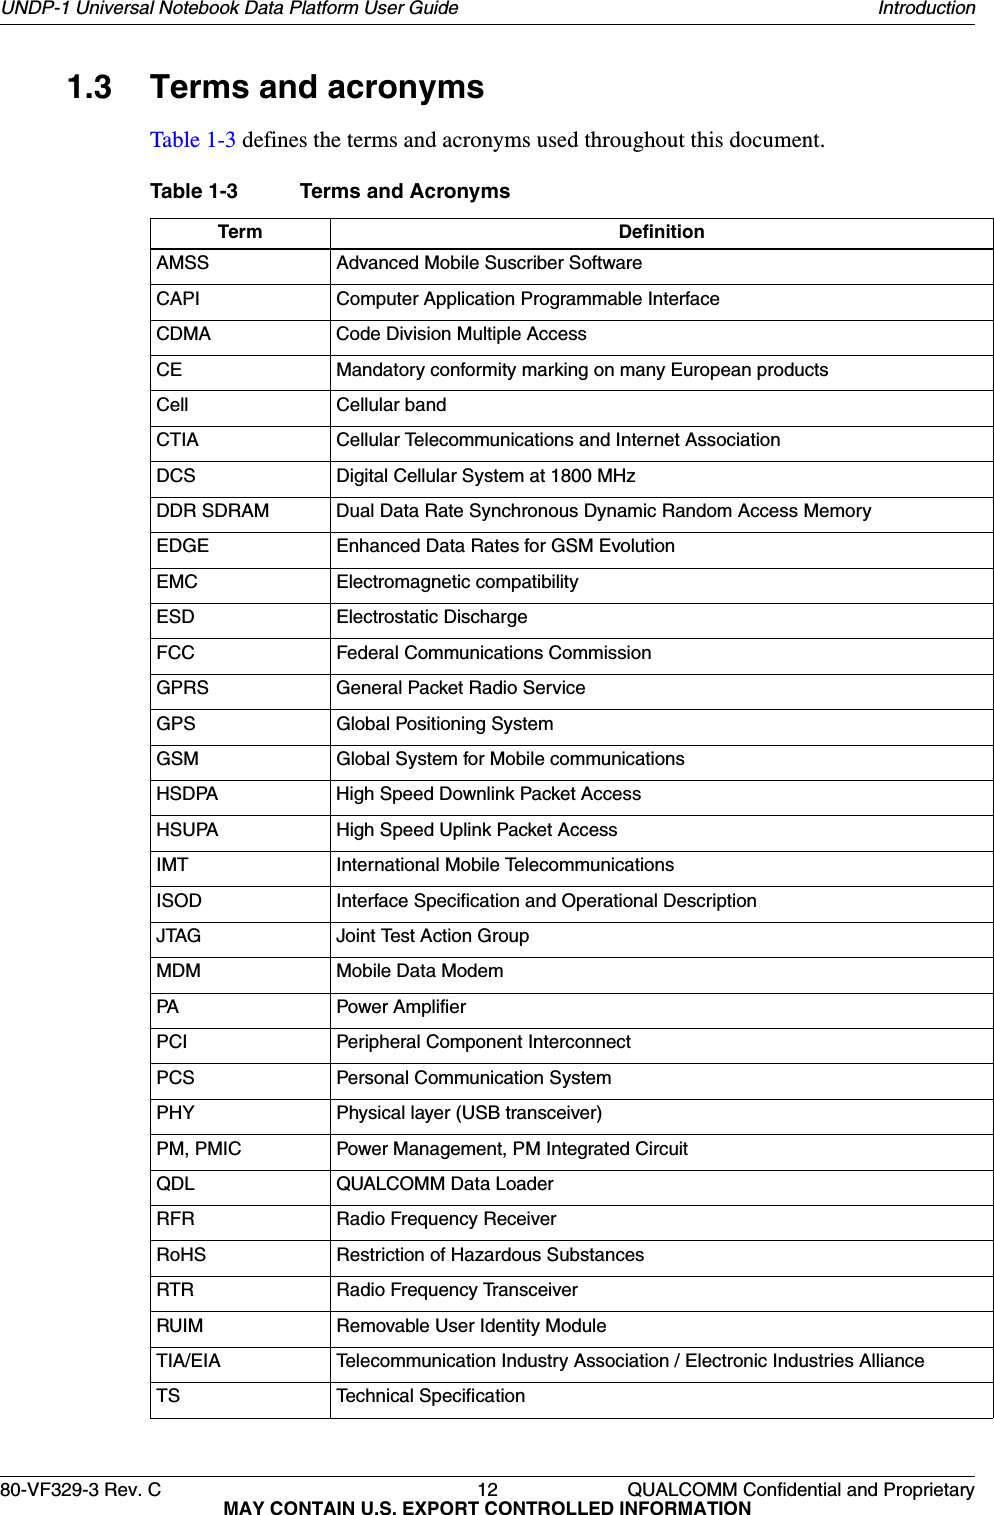 80-VF329-3 Rev. C 12 QUALCOMM Confidential and ProprietaryMAY CONTAIN U.S. EXPORT CONTROLLED INFORMATIONUNDP-1 Universal Notebook Data Platform User Guide Introduction1.3 Terms and acronymsTable 1-3 defines the terms and acronyms used throughout this document.Table 1-3 Terms and AcronymsTerm DefinitionAMSS Advanced Mobile Suscriber SoftwareCAPI Computer Application Programmable InterfaceCDMA Code Division Multiple AccessCE Mandatory conformity marking on many European productsCell Cellular bandCTIA Cellular Telecommunications and Internet AssociationDCS Digital Cellular System at 1800 MHzDDR SDRAM Dual Data Rate Synchronous Dynamic Random Access MemoryEDGE Enhanced Data Rates for GSM EvolutionEMC Electromagnetic compatibilityESD Electrostatic DischargeFCC Federal Communications CommissionGPRS General Packet Radio ServiceGPS Global Positioning SystemGSM Global System for Mobile communicationsHSDPA High Speed Downlink Packet AccessHSUPA High Speed Uplink Packet AccessIMT International Mobile TelecommunicationsISOD Interface Specification and Operational DescriptionJTAG Joint Test Action GroupMDM Mobile Data ModemPA Power AmplifierPCI Peripheral Component InterconnectPCS Personal Communication SystemPHY Physical layer (USB transceiver)PM, PMIC Power Management, PM Integrated CircuitQDL QUALCOMM Data LoaderRFR Radio Frequency ReceiverRoHS Restriction of Hazardous SubstancesRTR Radio Frequency TransceiverRUIM Removable User Identity ModuleTIA/EIA Telecommunication Industry Association / Electronic Industries AllianceTS Technical Specification